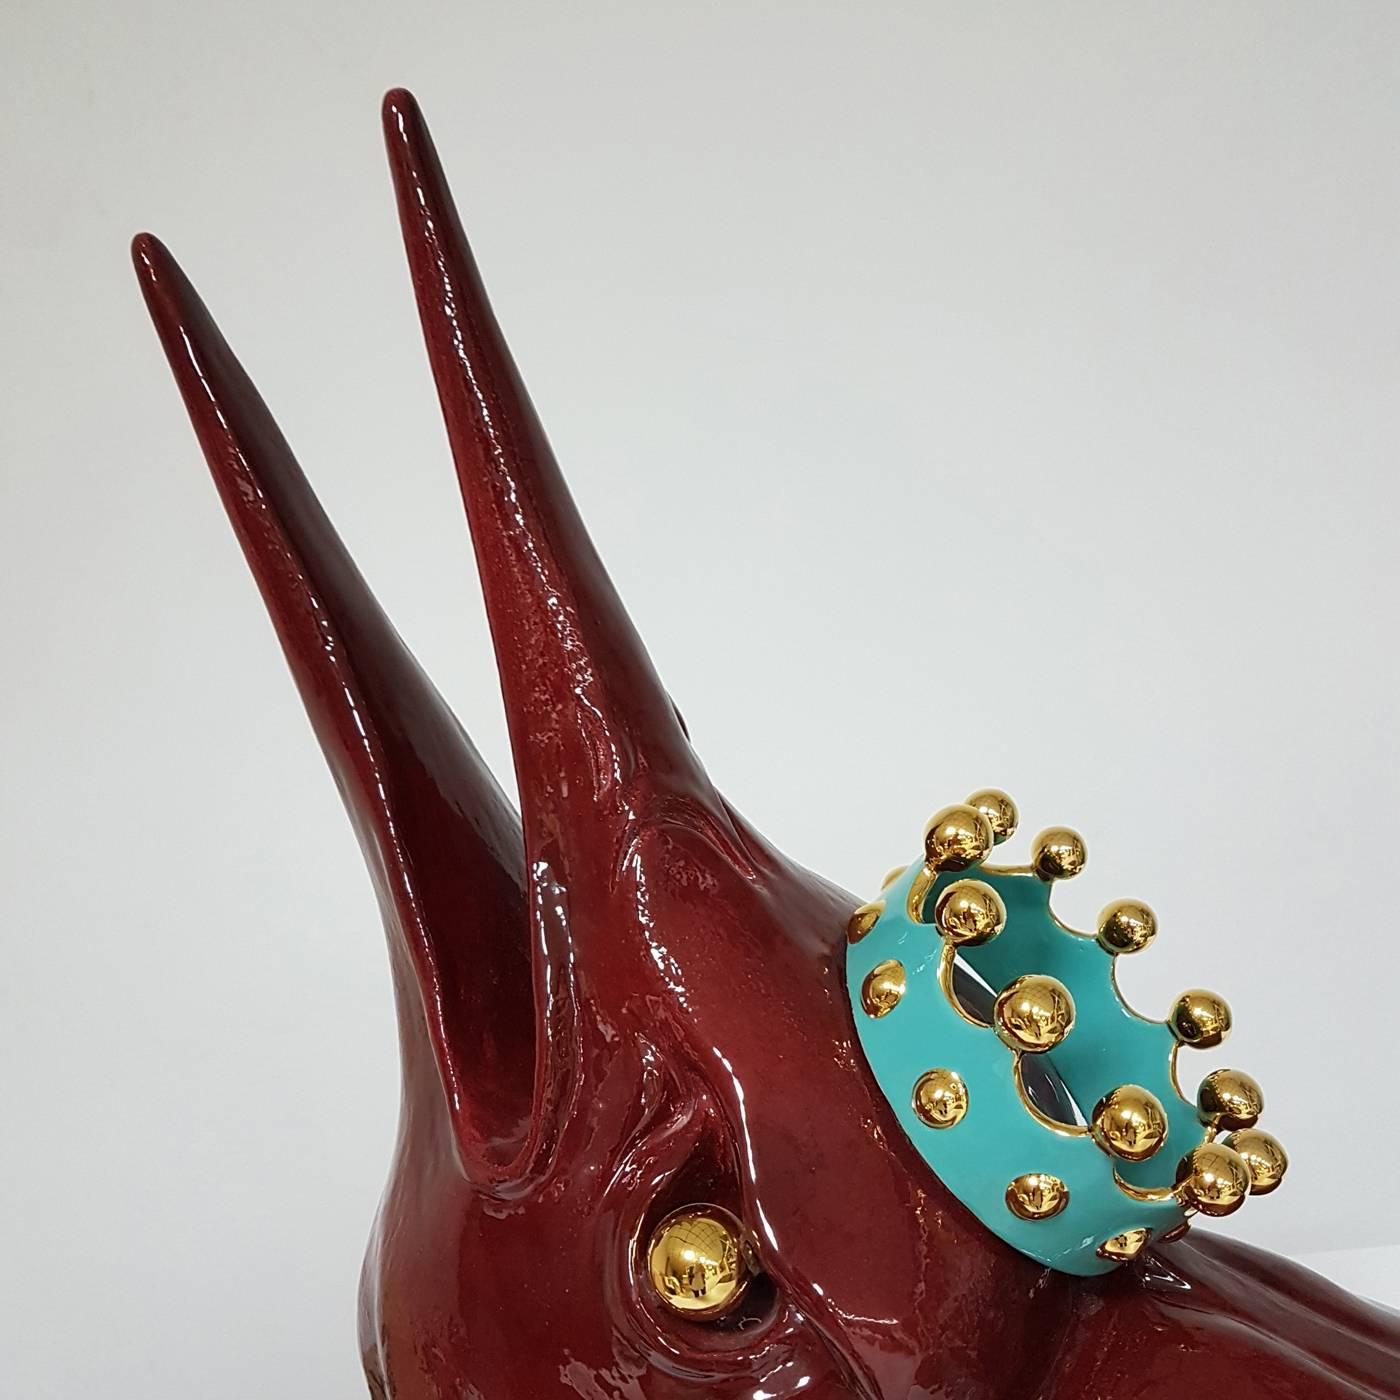 This remarkable piece, made using a mold and handcrafted with the pinch method, has the shape of a bird bust in glossy Sienna finish with a turquoise and gold crown. The striking texture and metallic glare are obtained with an exclusive technique